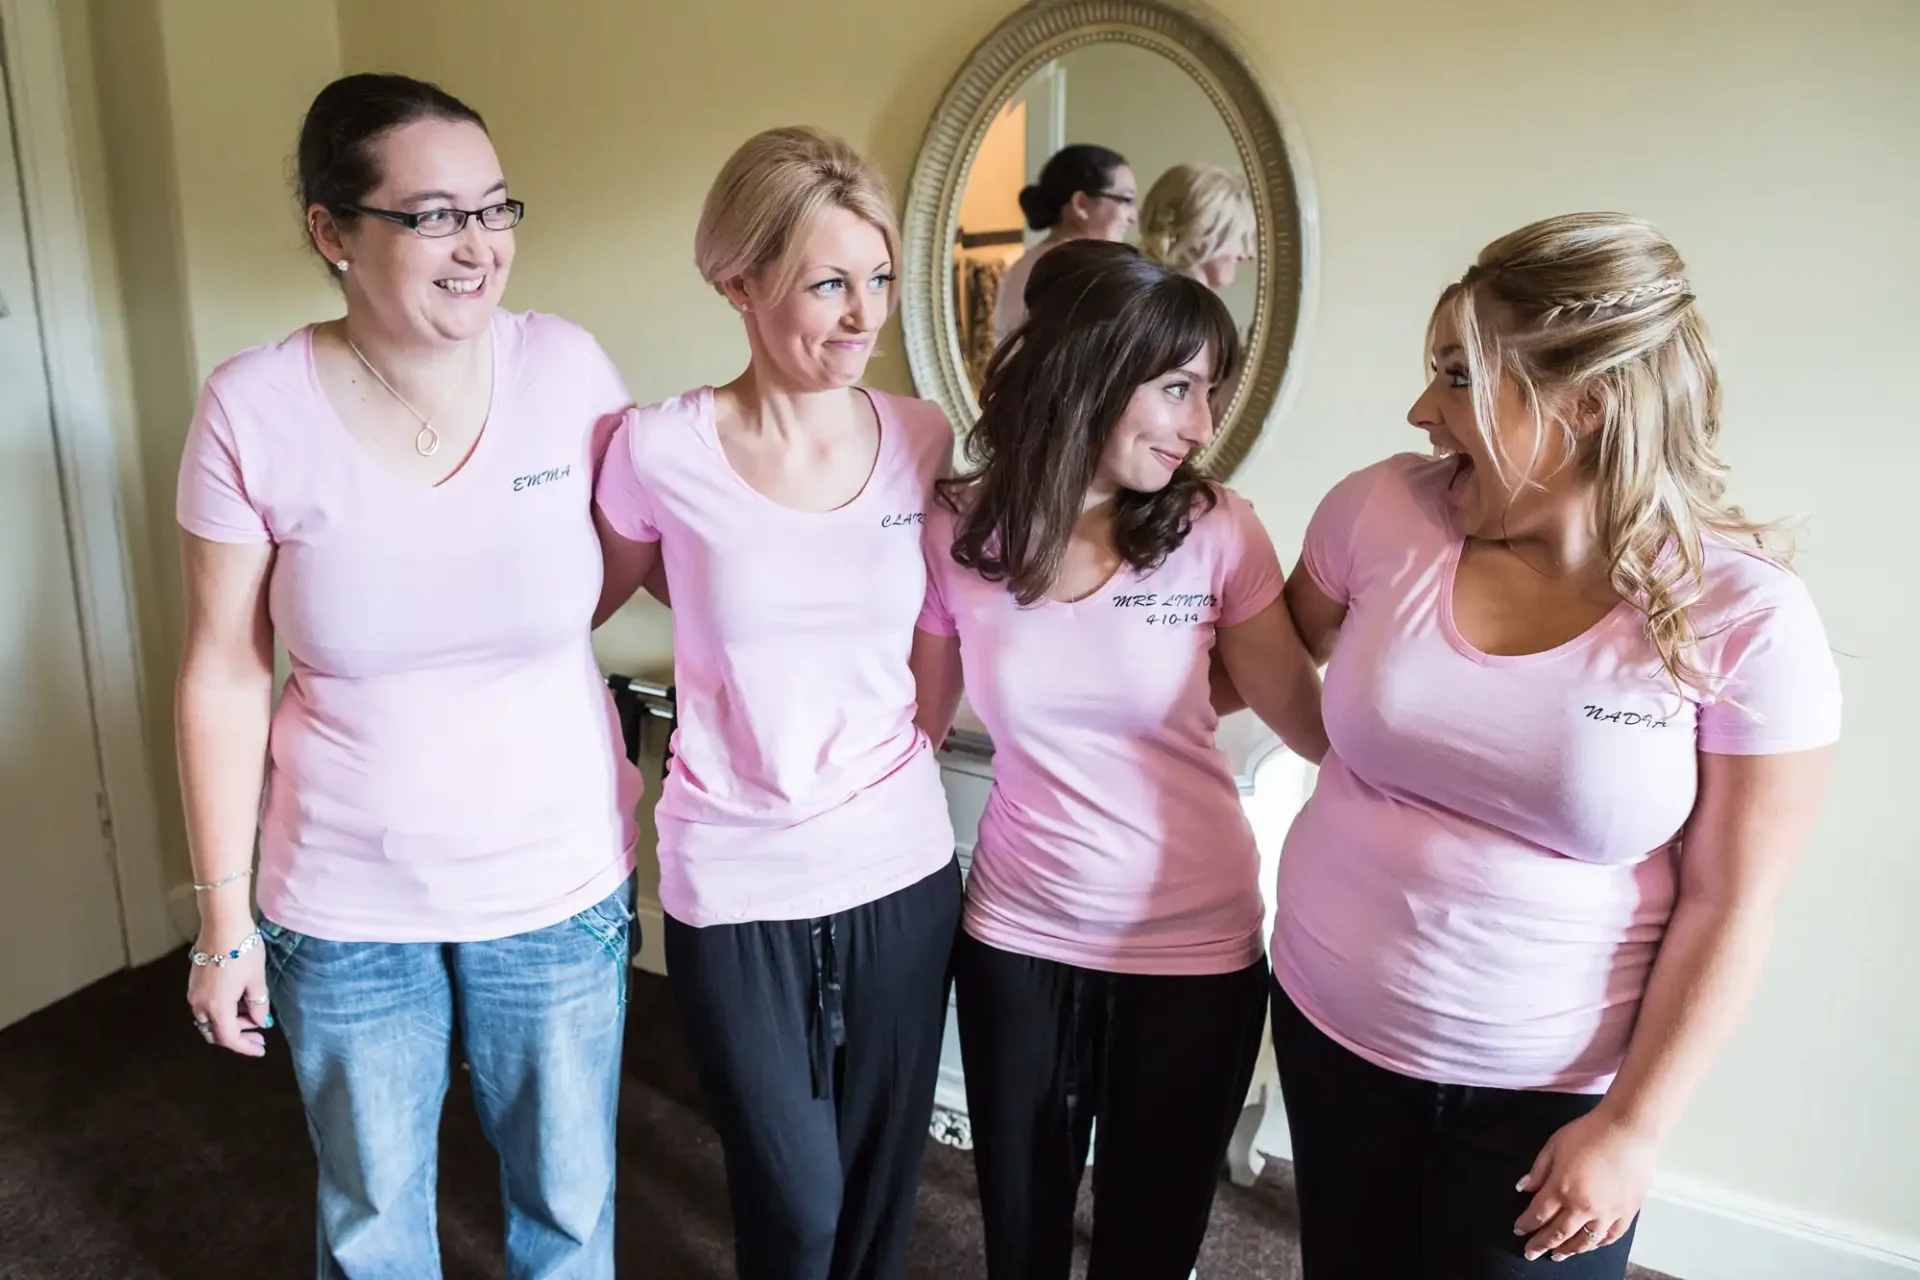 Four women in matching pink t-shirts smiling and interacting in a room, with names on their shirts: jessica, cathy, beth, and taylor.